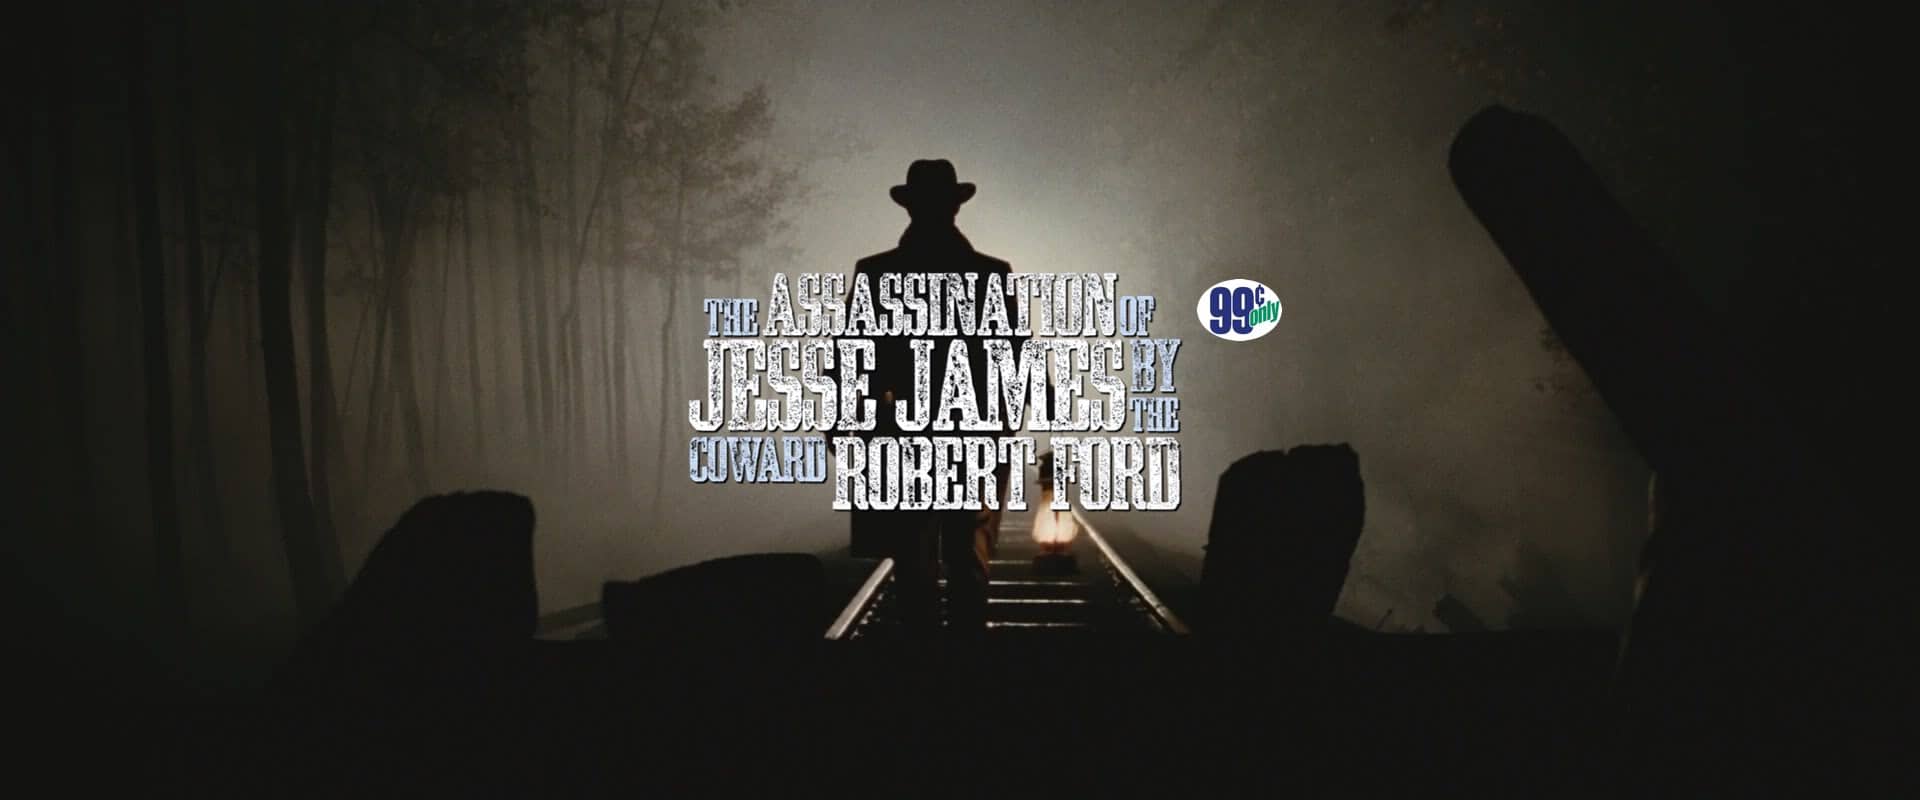 Geek insider, geekinsider, geekinsider. Com,, the (other) itunes $0. 99 movie of the week: 'the assassination of jesse james by the coward robert ford', entertainment